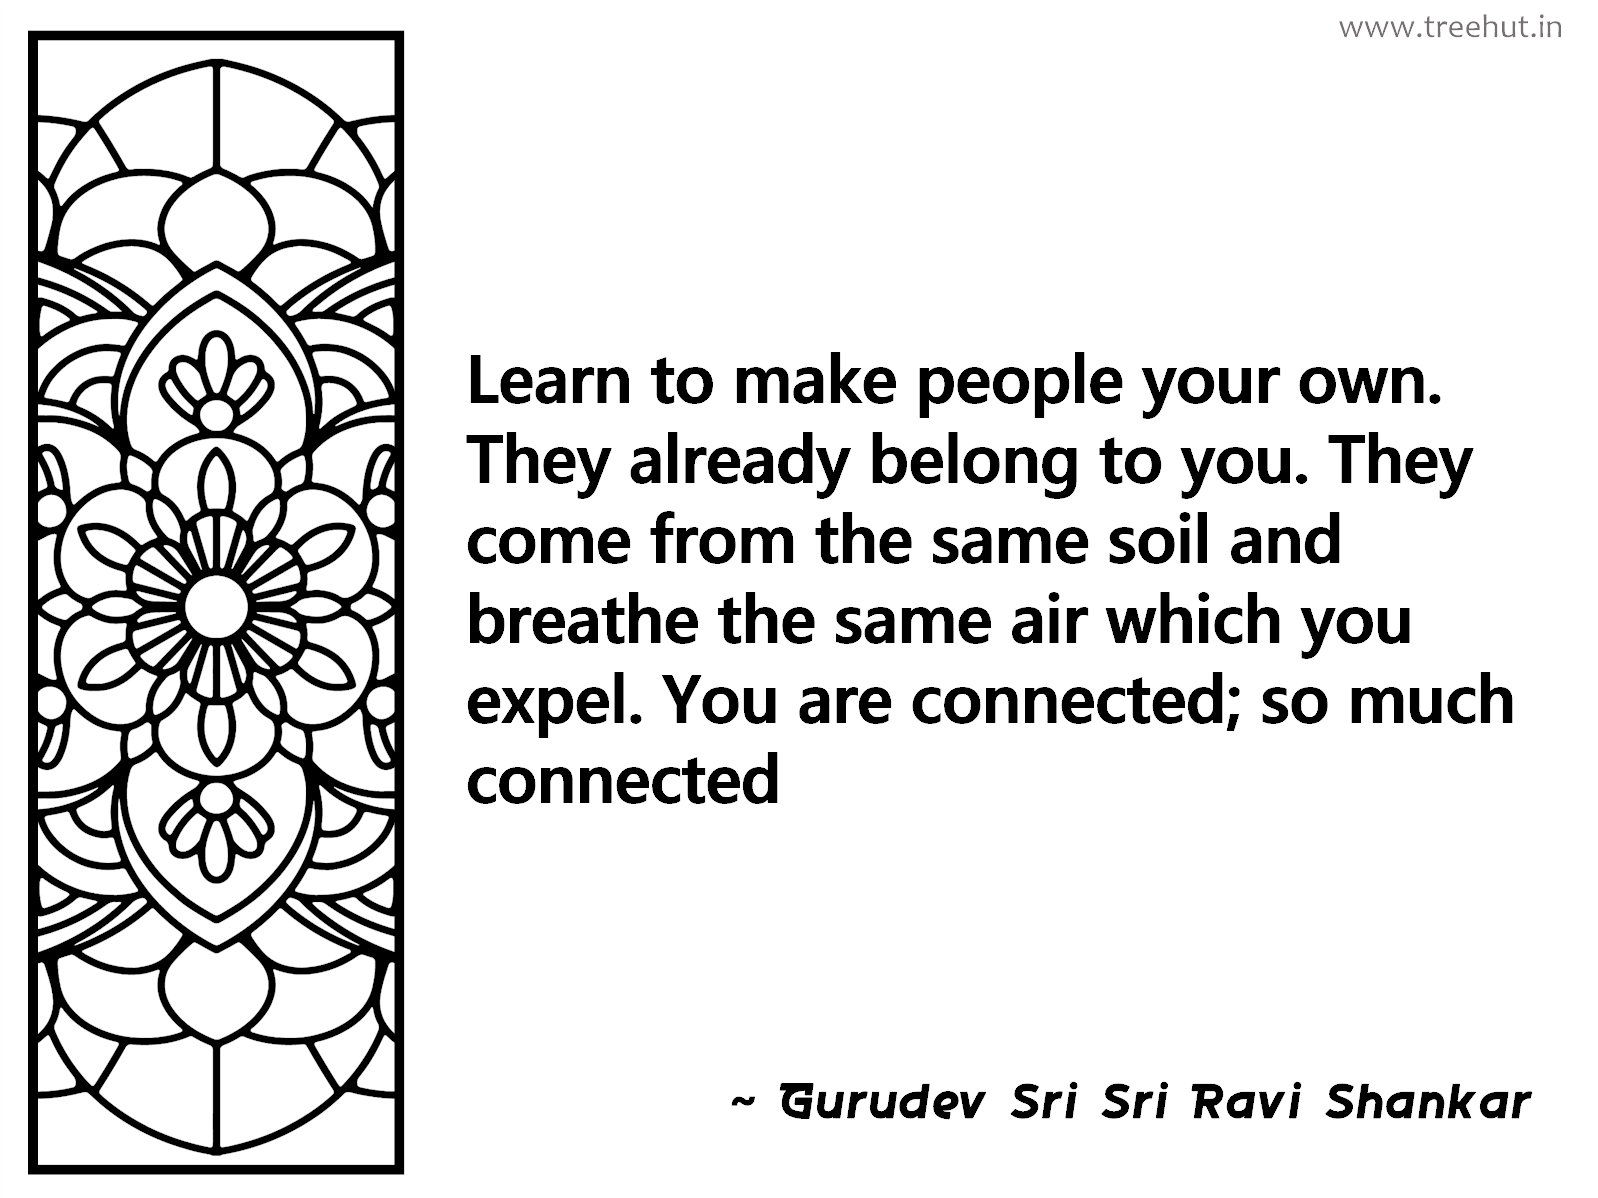 Learn to make people your own. They already belong to you. They come from the same soil and breathe the same air which you expel. You are connected; so much connected Inspirational Quote by Gurudev Sri Sri Ravi Shankar, coloring pages